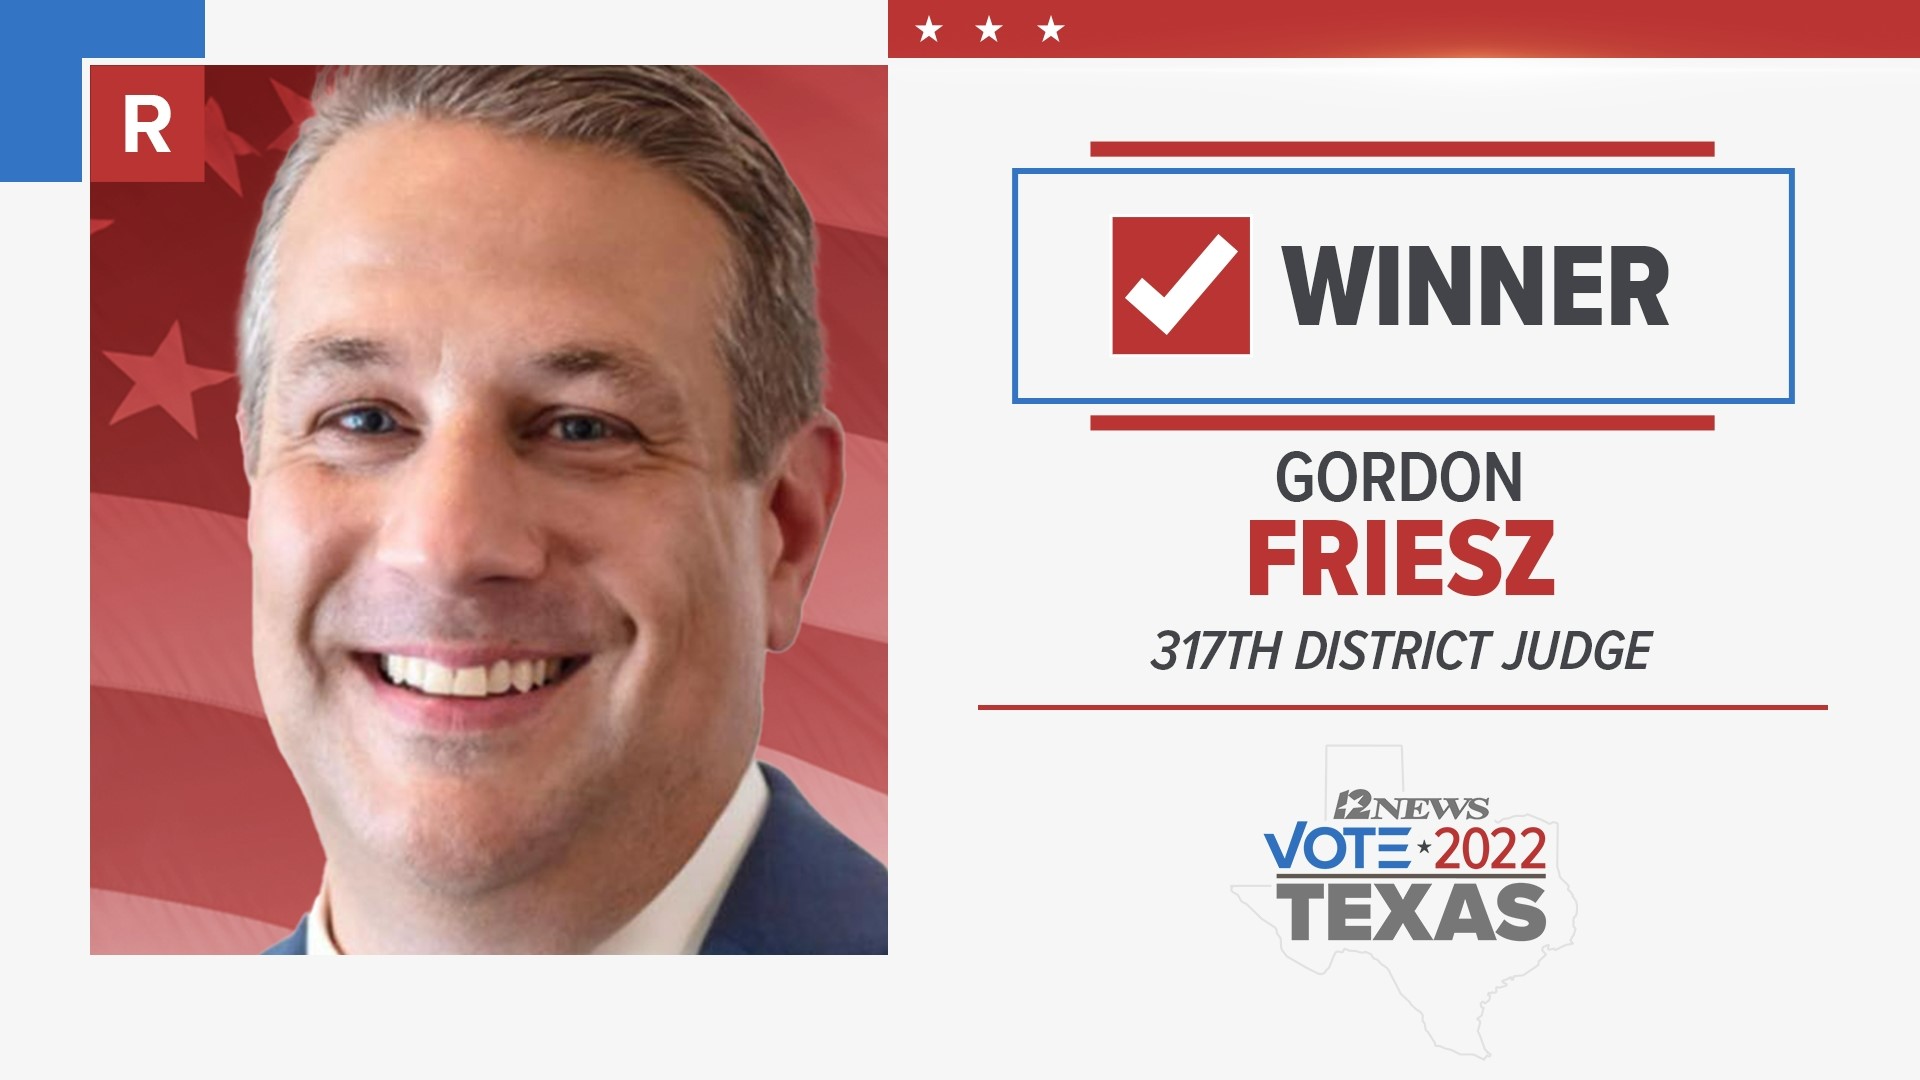 The votes are in and Gordon Friesz is the new 317th District Court Judge in Jefferson County.